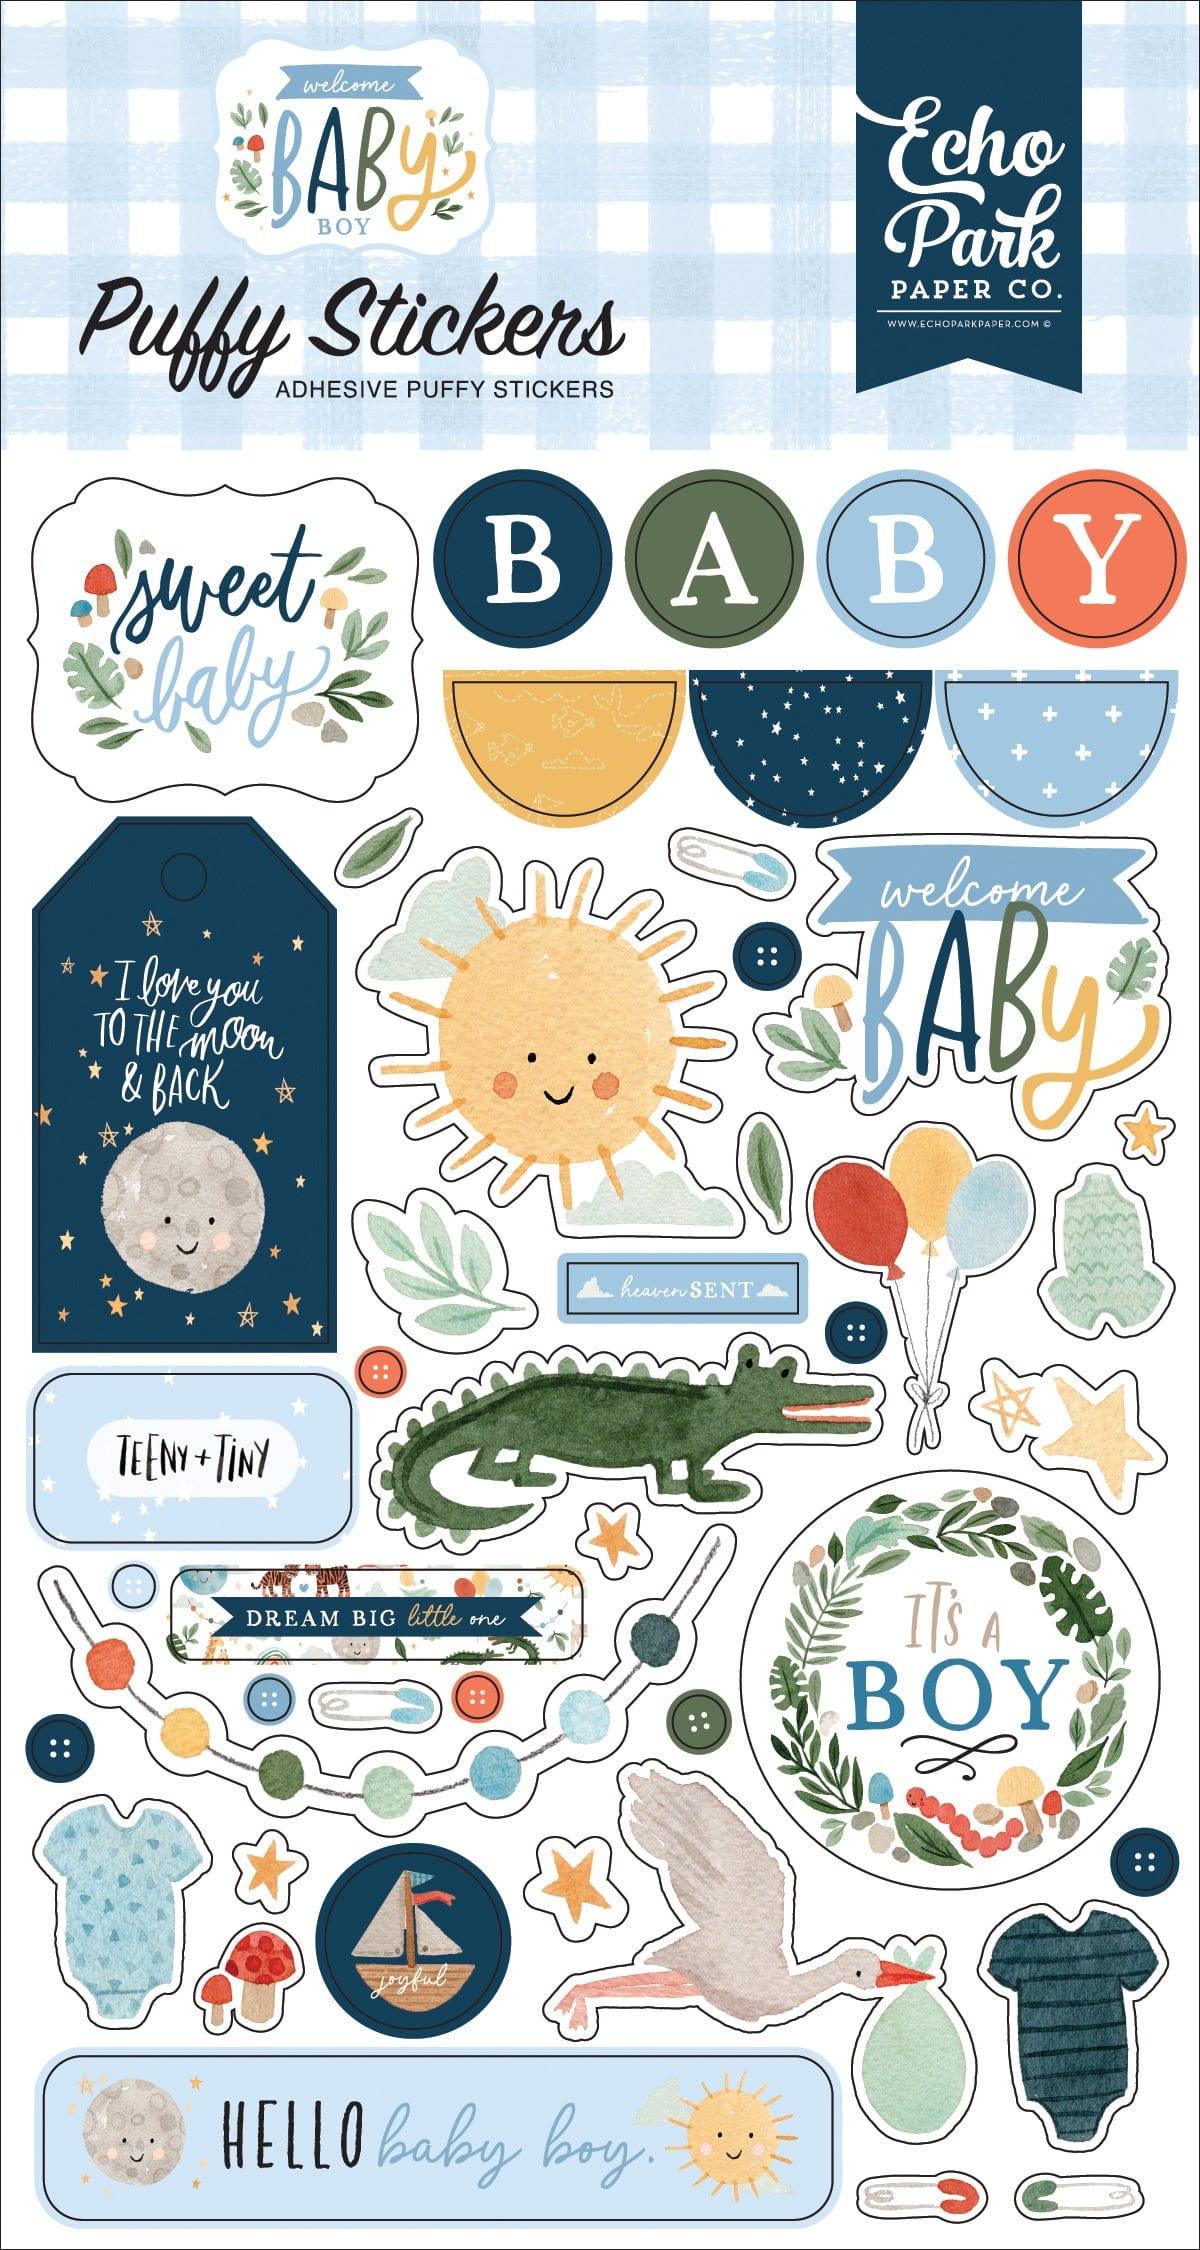 Our Baby Girl: Our Baby Girl Puffy Stickers - Echo Park Paper Co.